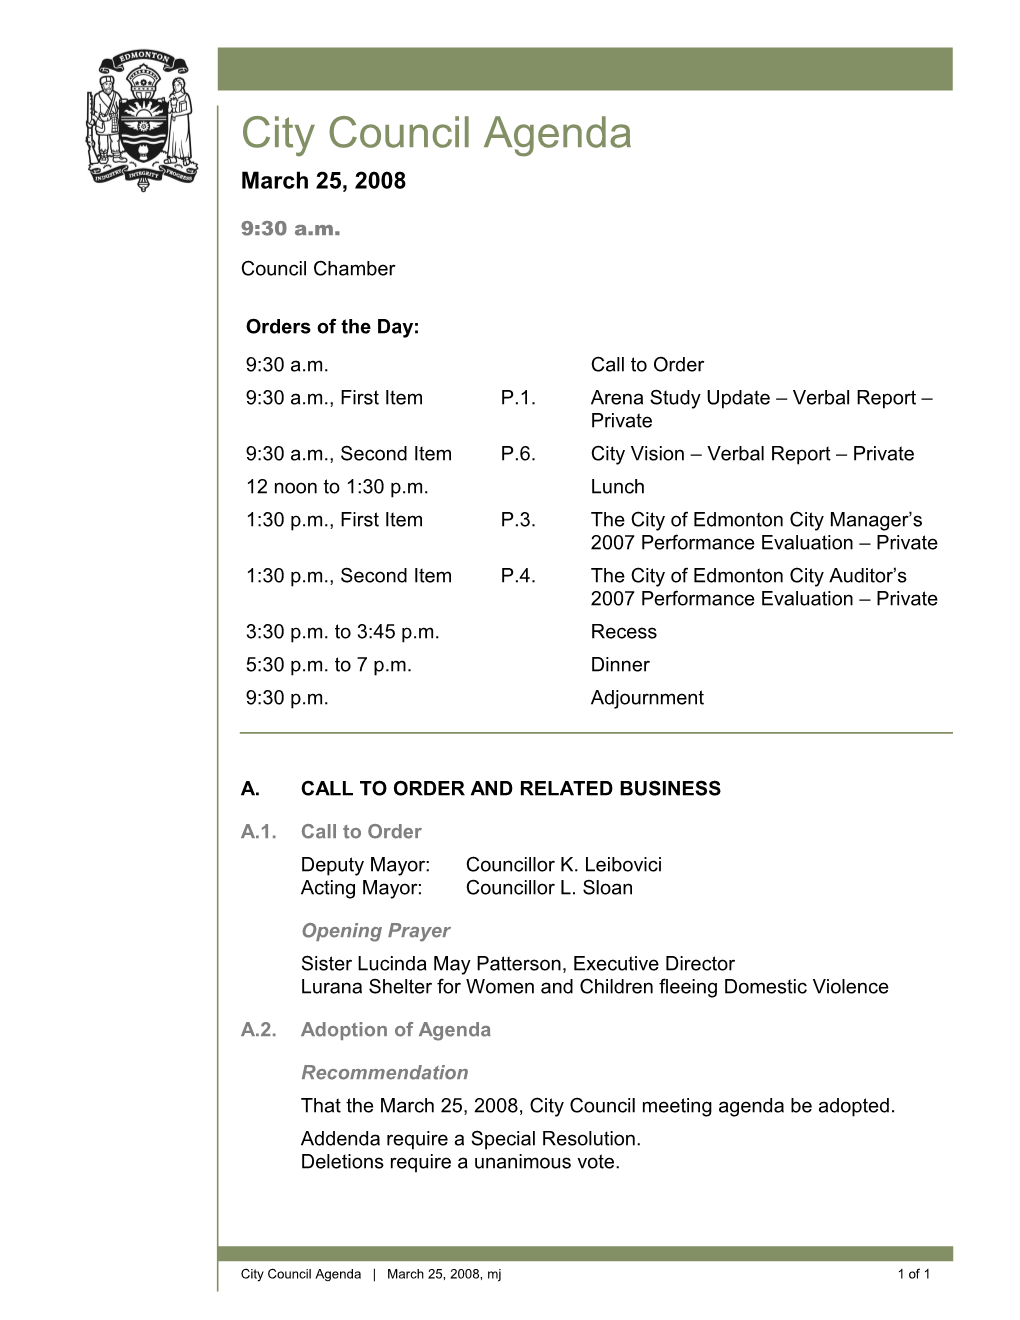 Agenda for City Council March 25, 2008 Meeting